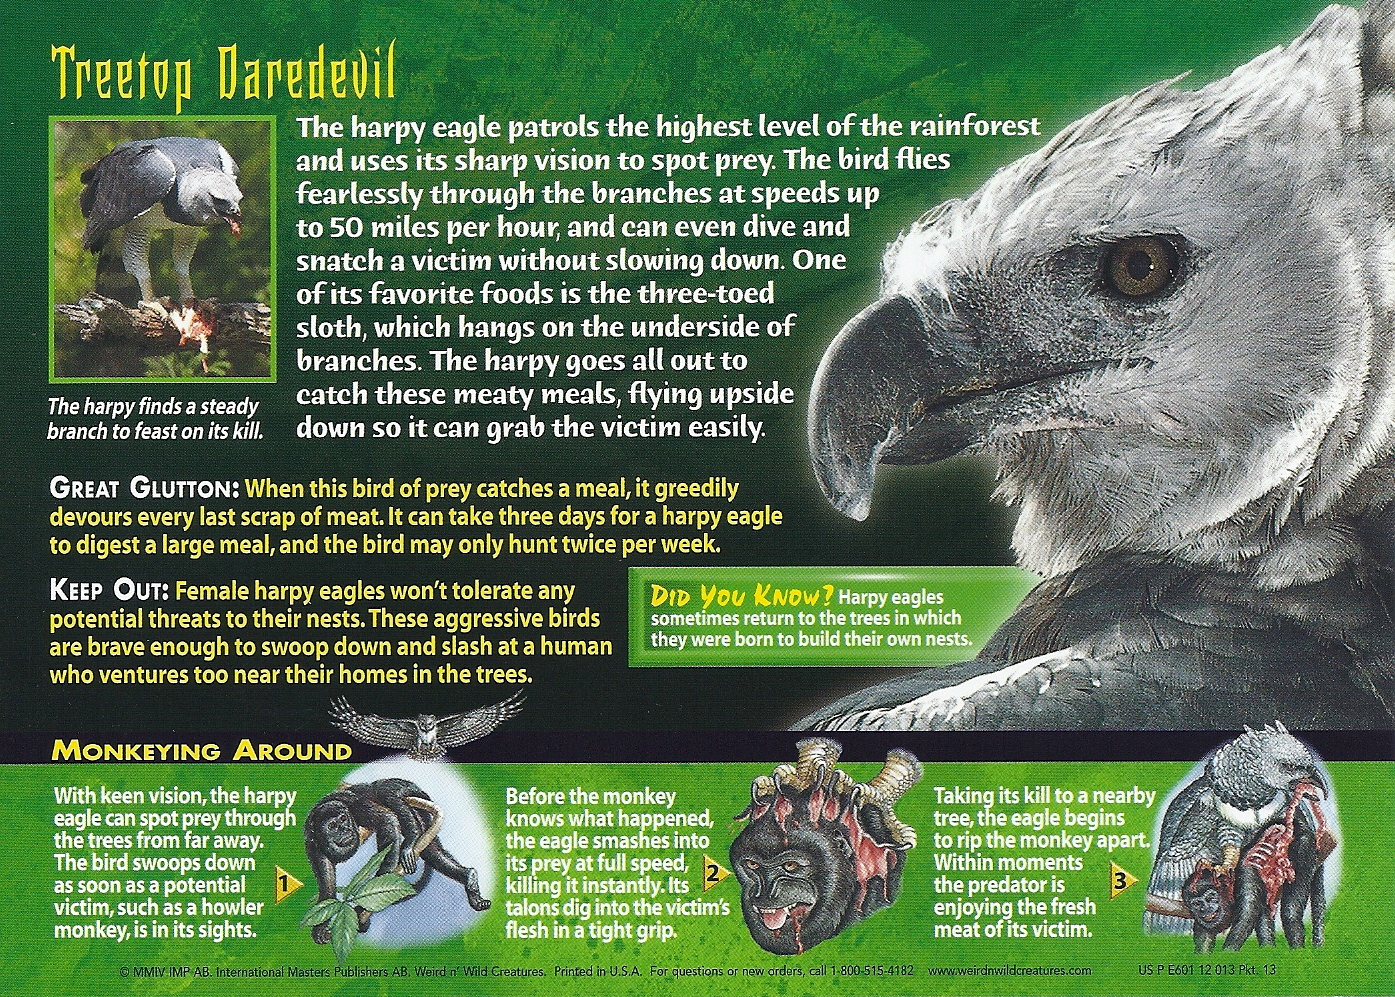 Harpy eagle guide: where these strange but iconic eagles live, how